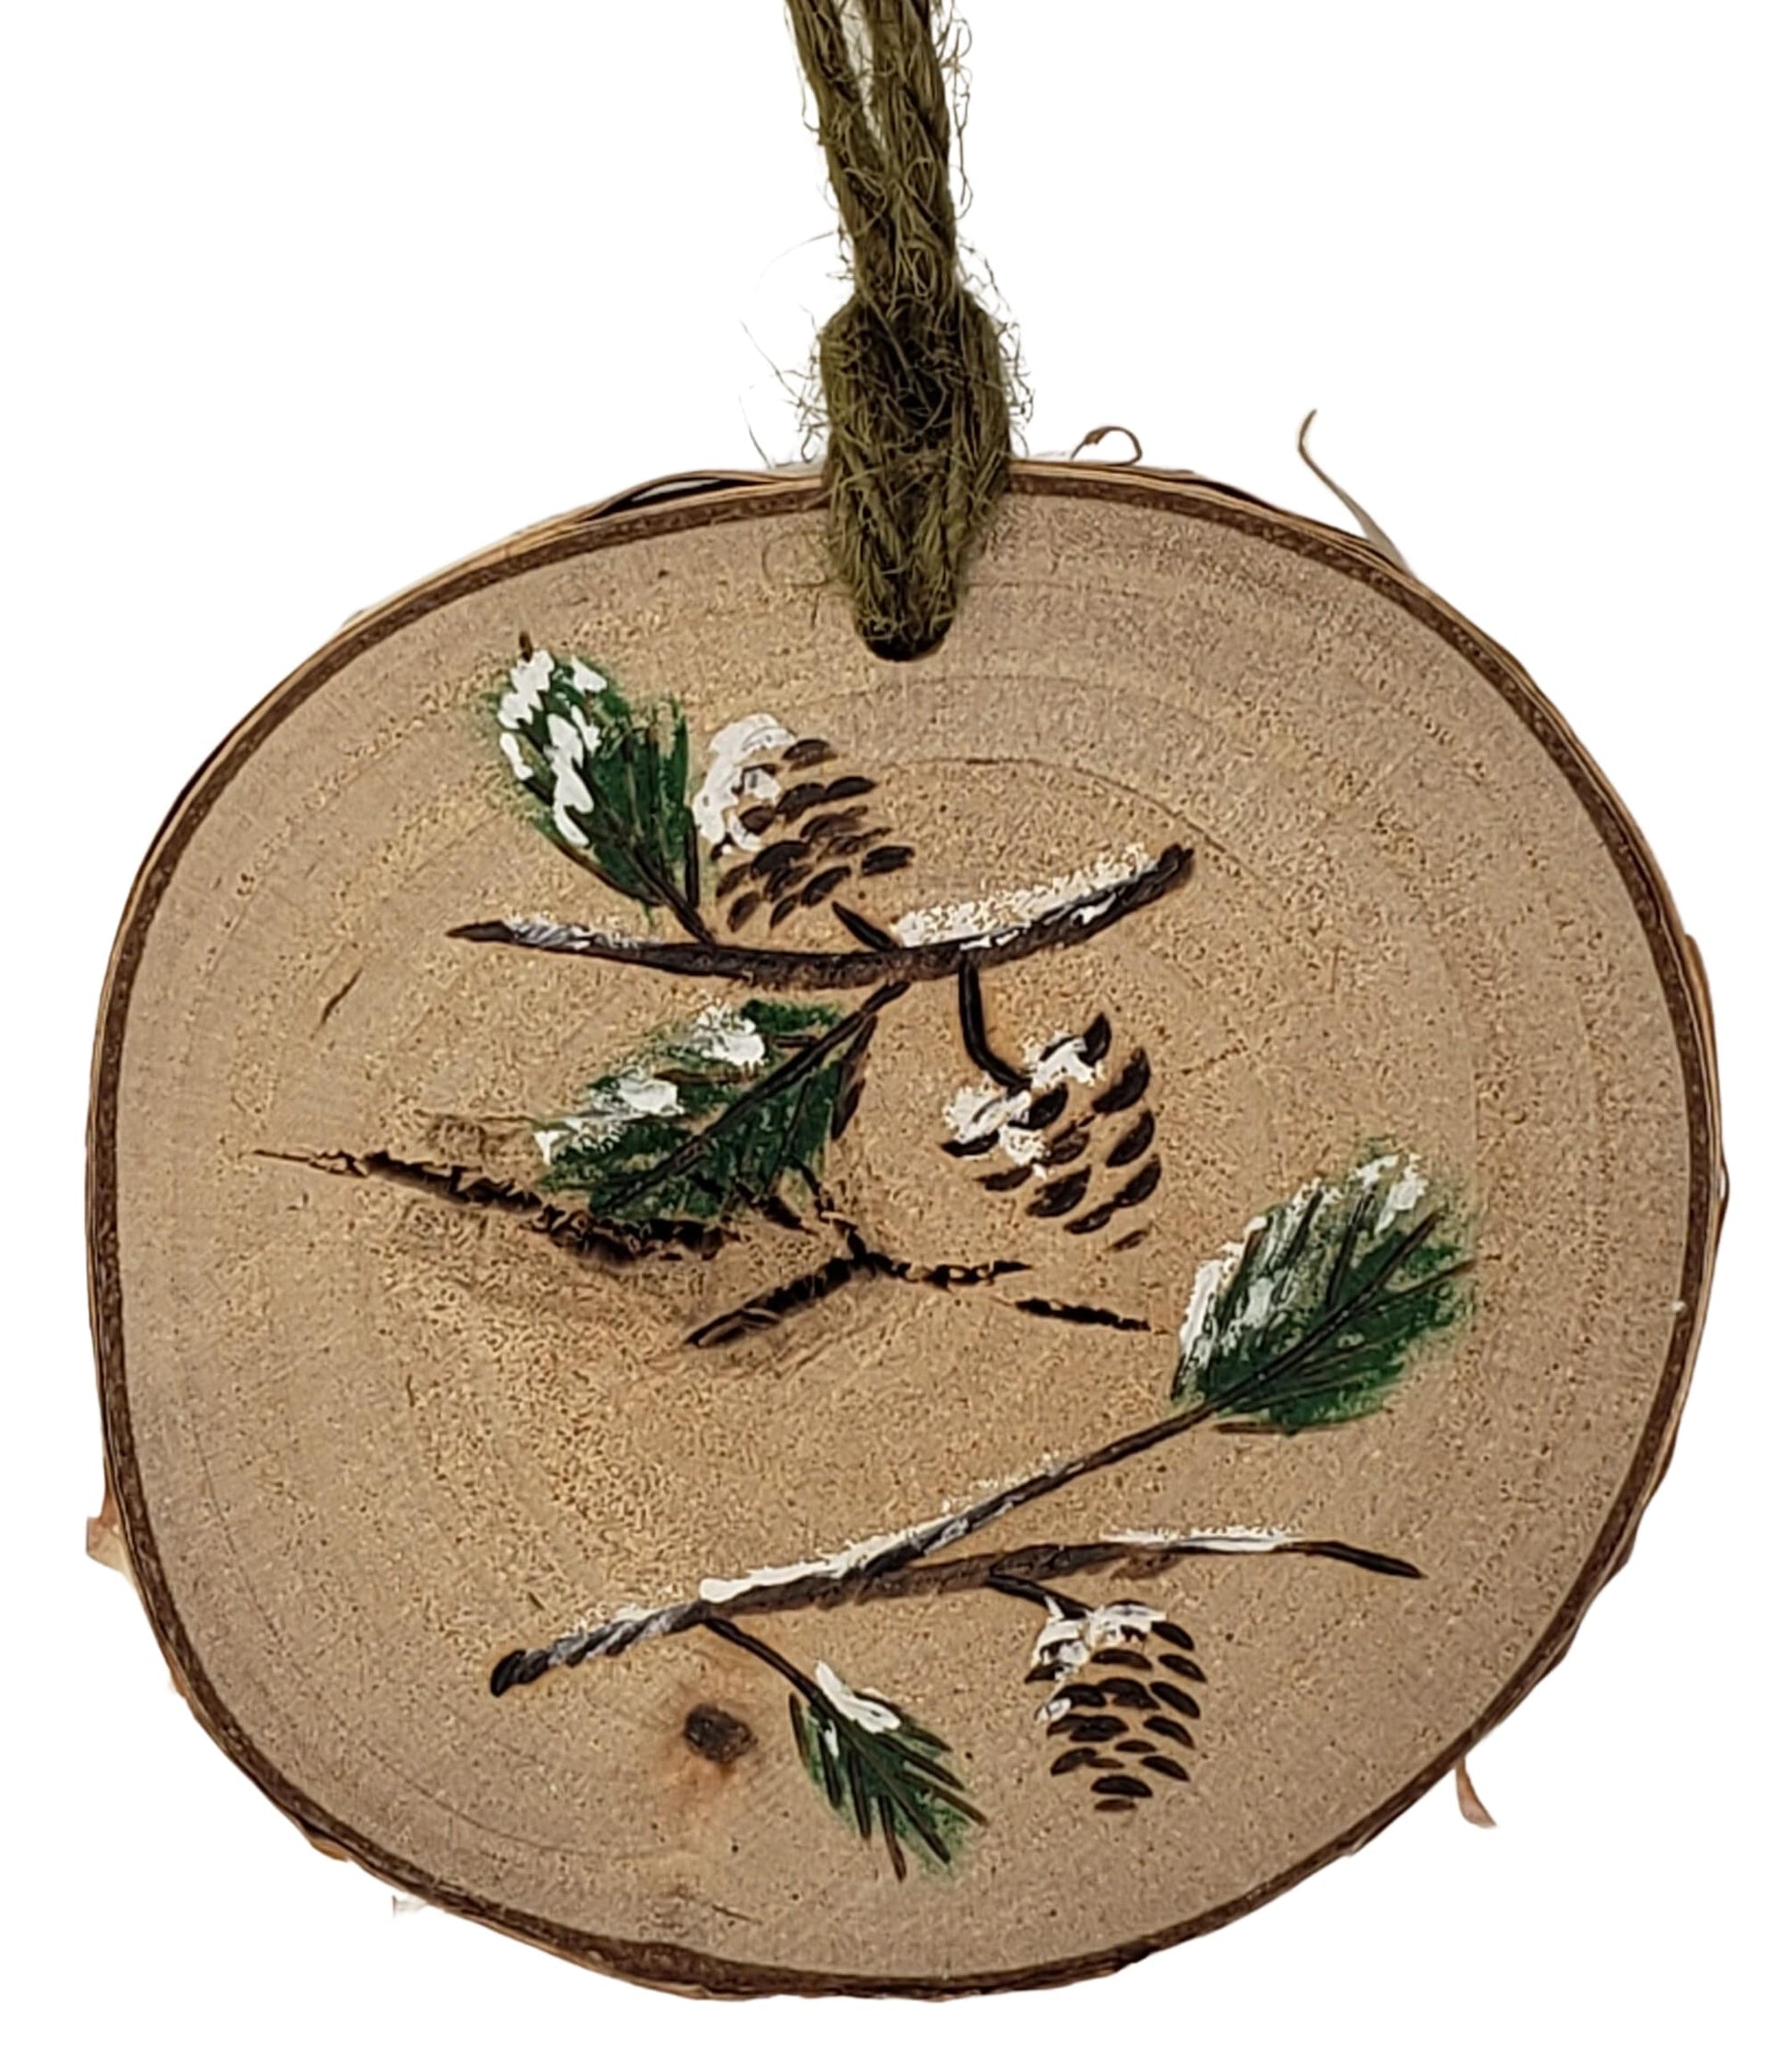 Natures Christmas- small wood burned and hand painted pine bough Christmas tree ornament on birch wood